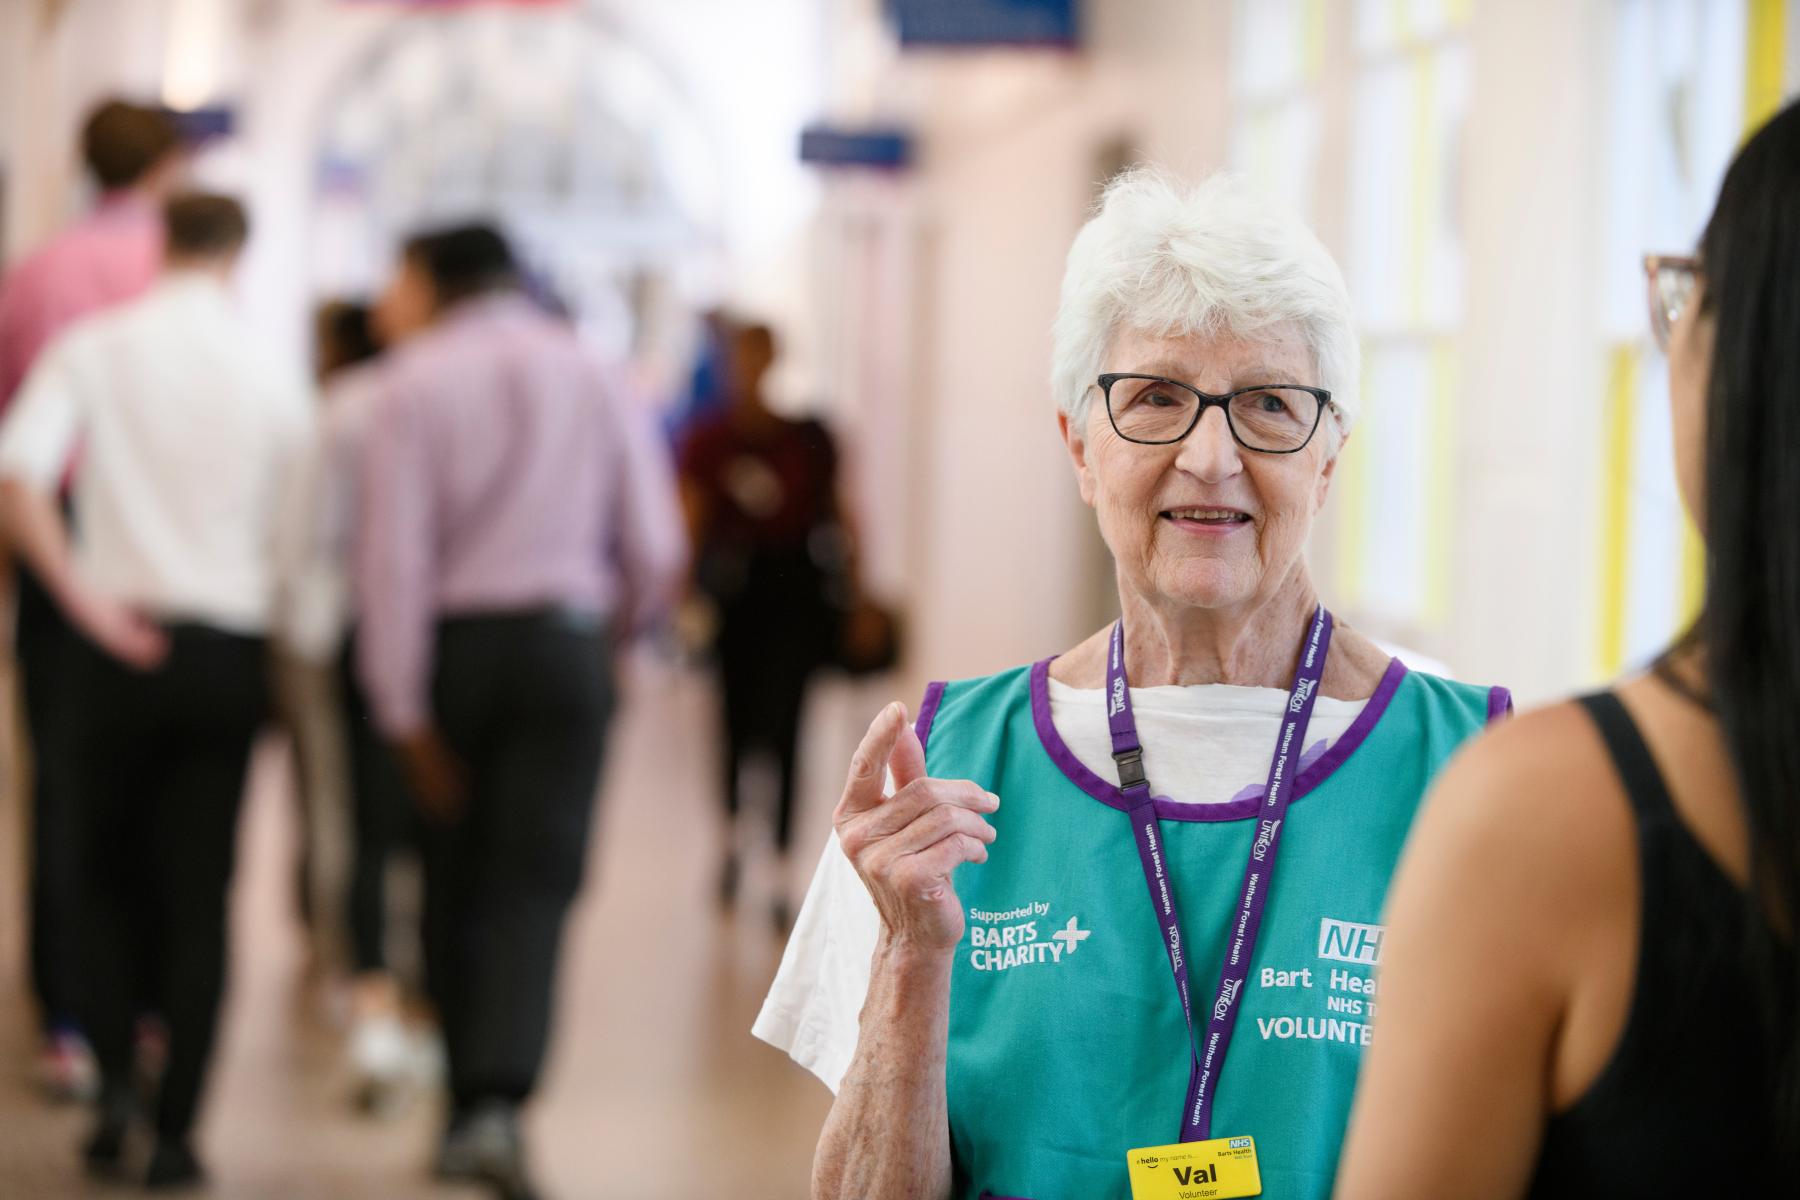 Volunteer Val speaks to a patient at Whipps Cross Hospital